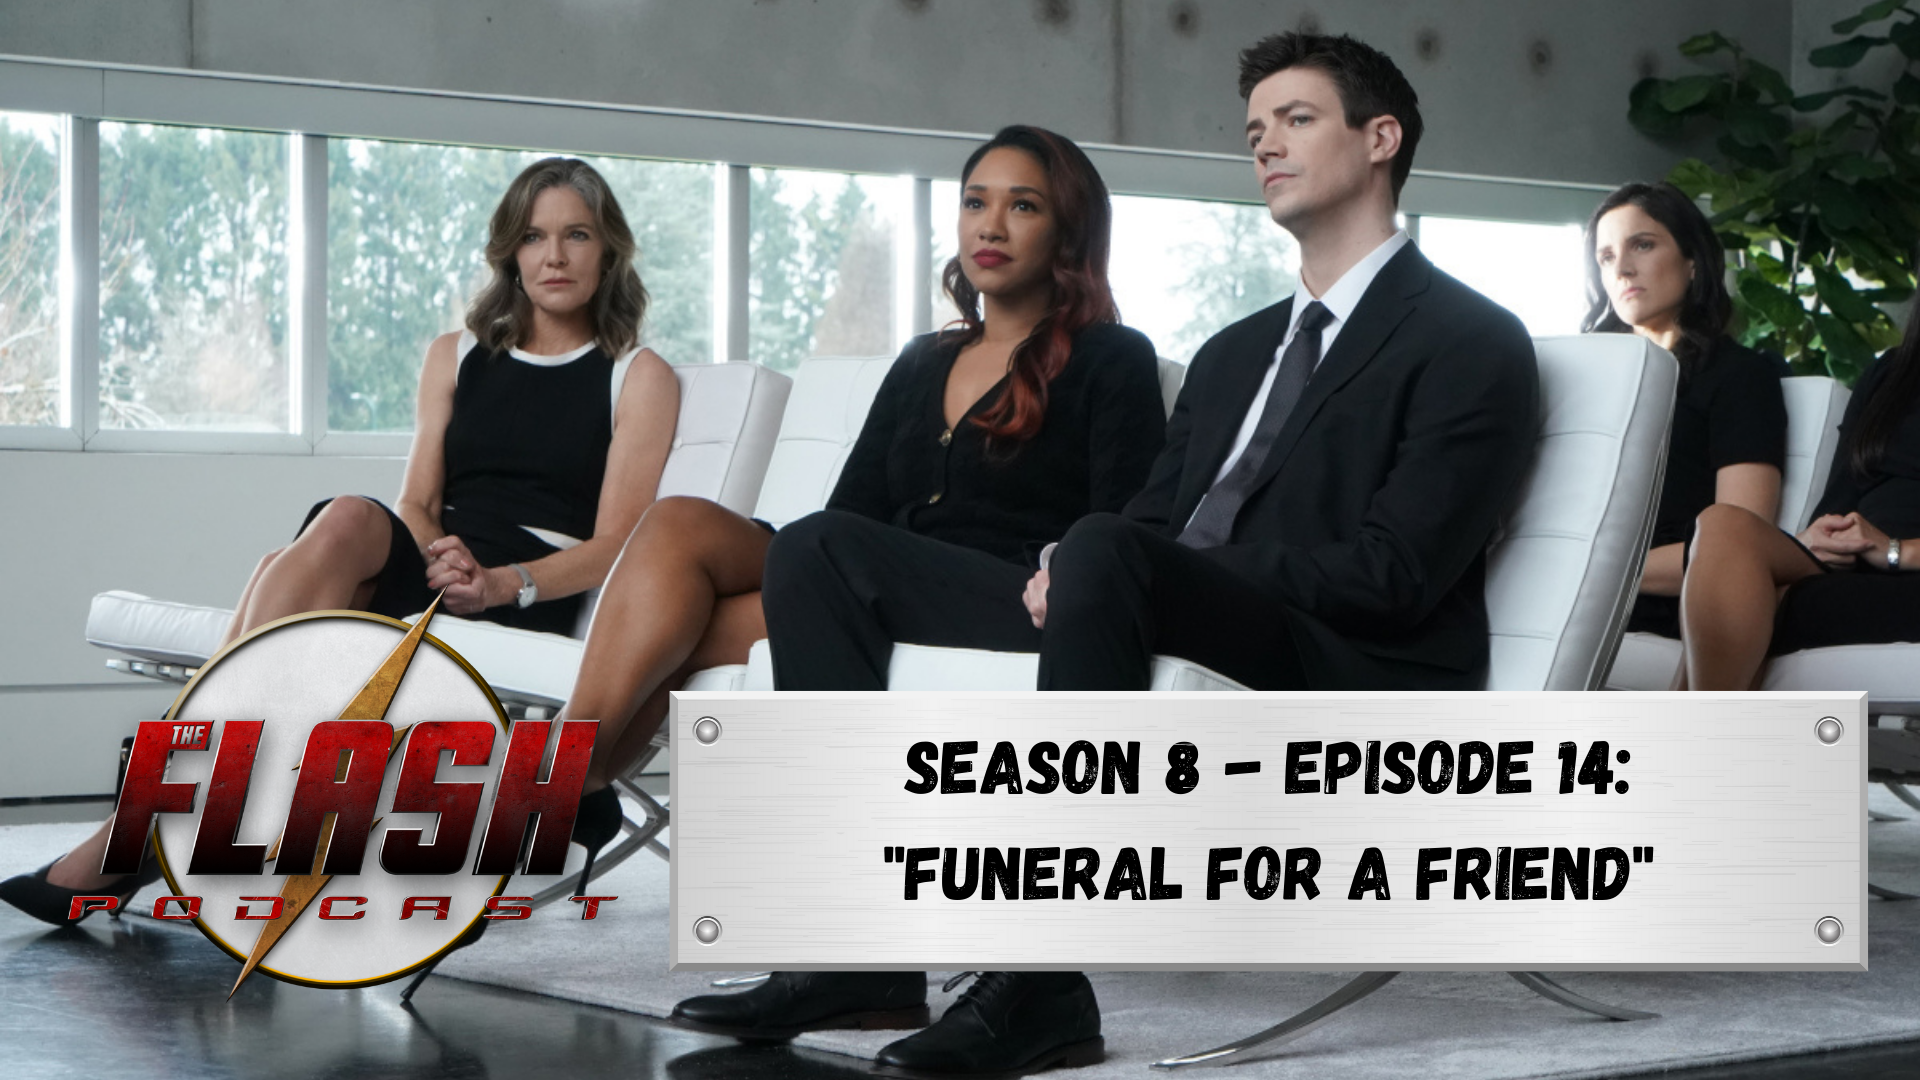 The-Flash-Podcast-Season-8 -Episode-14-Funeral-For-A-Friend